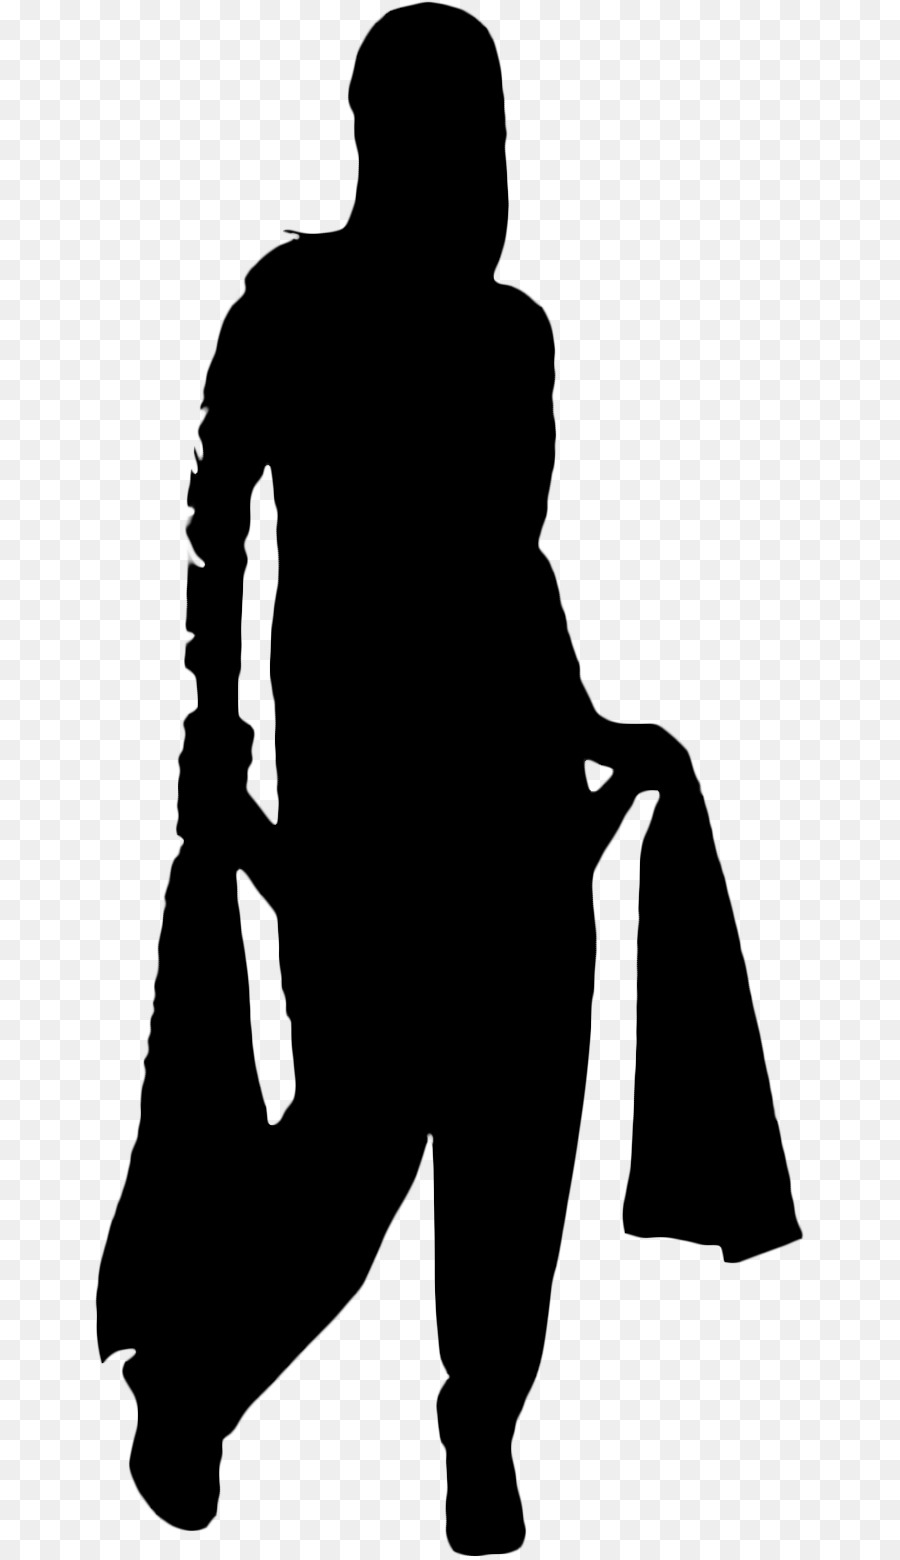 Human behavior Male Clip art Silhouette - png download - 542*639 - Free ...